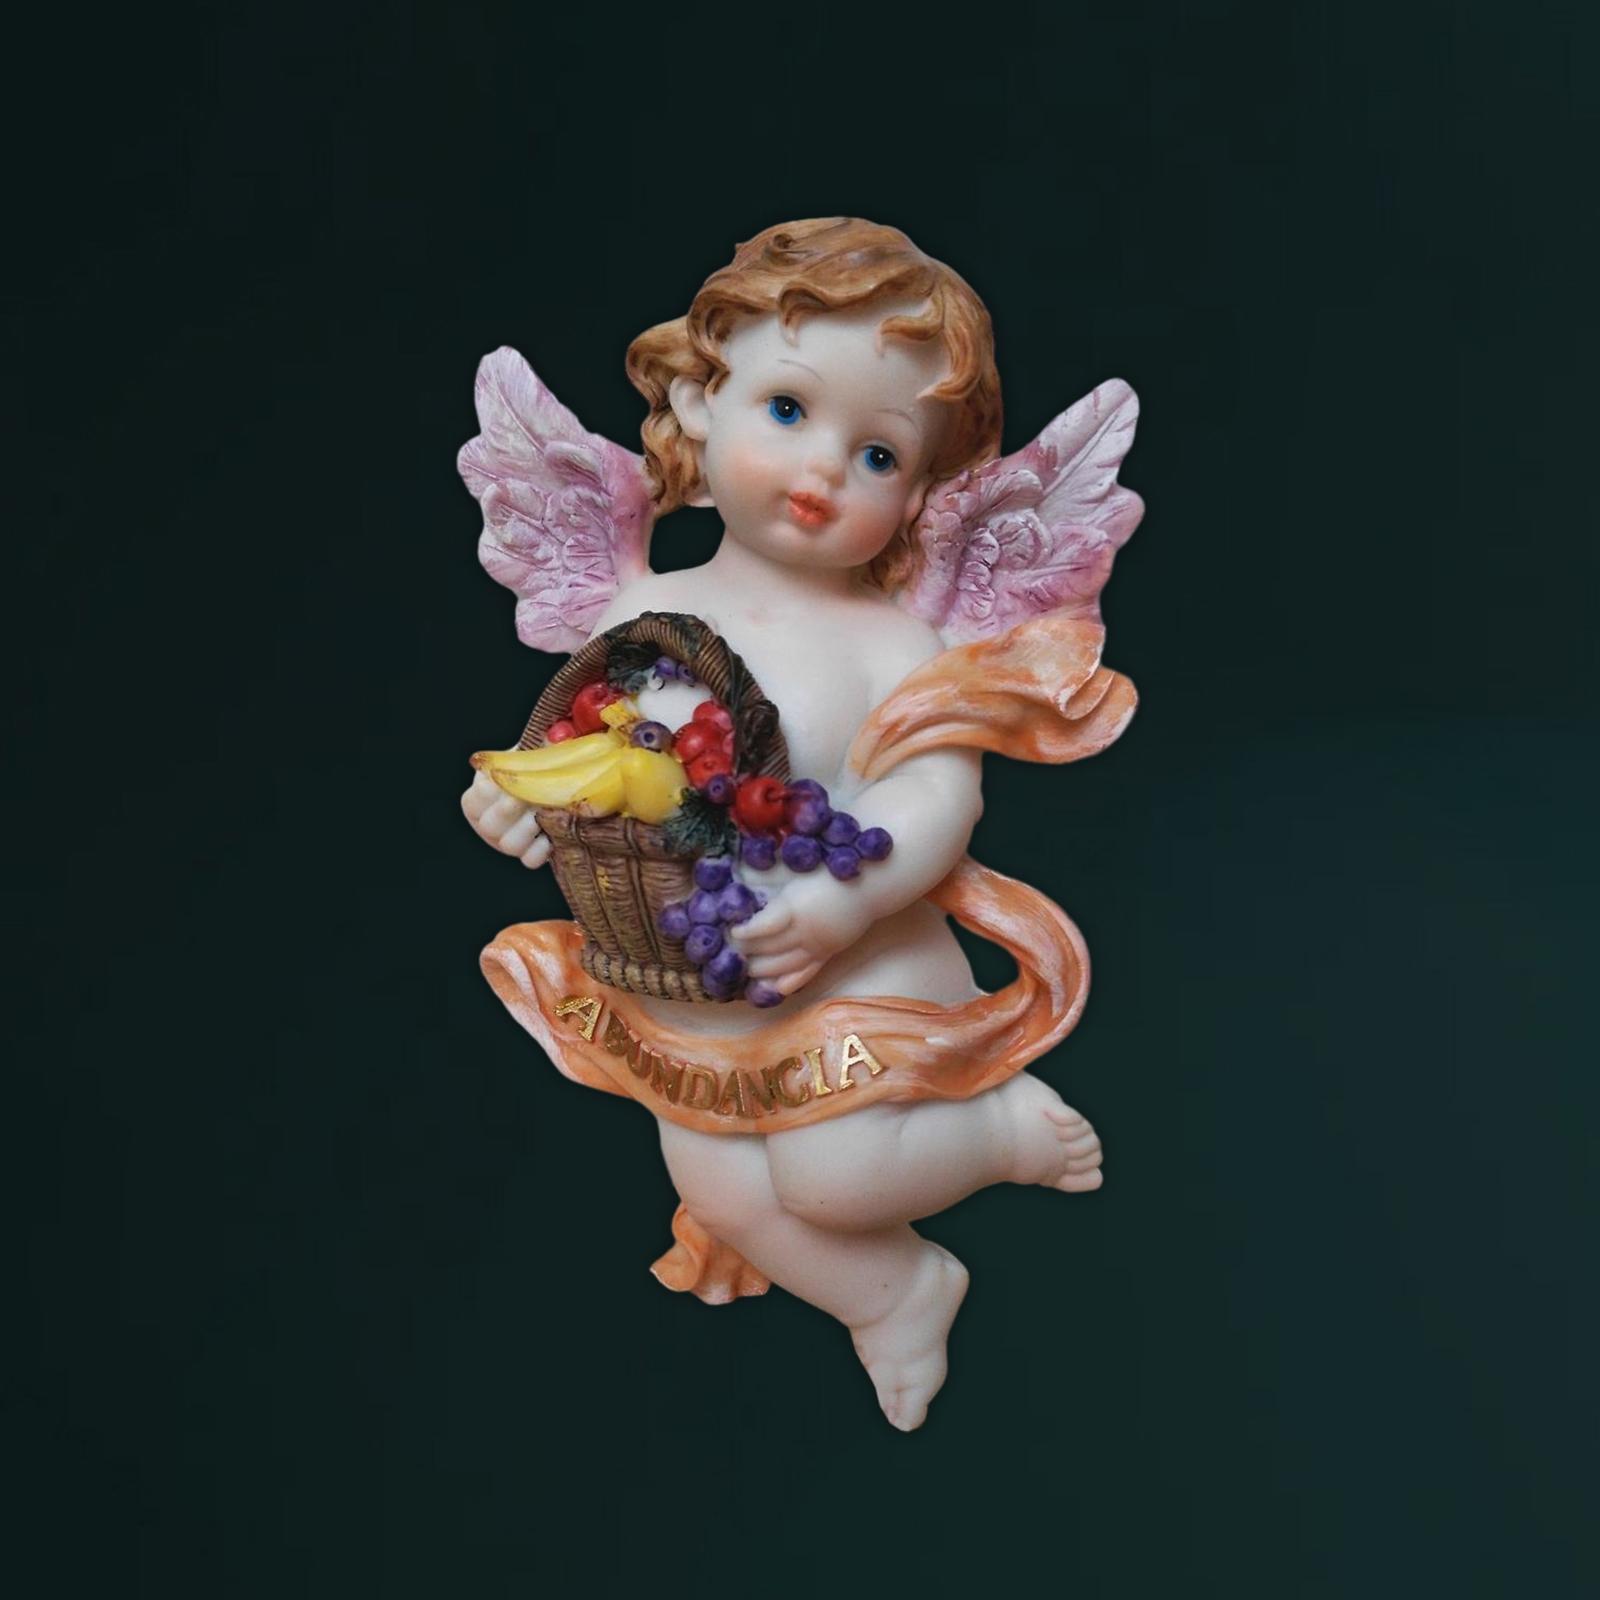 Resin Angel Statues Figurine Religious Angel Statue for Table Bedroom Office